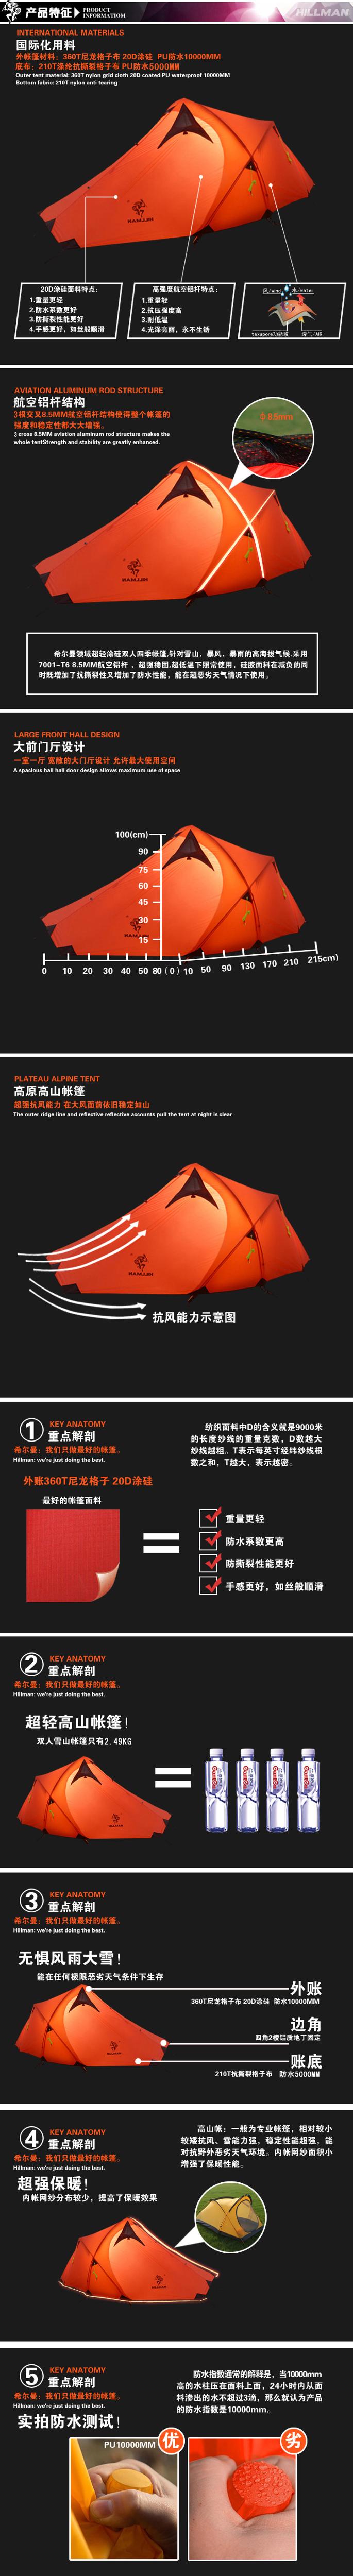 Cheap Goat Tents New professional 2 Person Ultralight 20D coated silicon tents big space outdoor Hiking Camping Tent Tents 